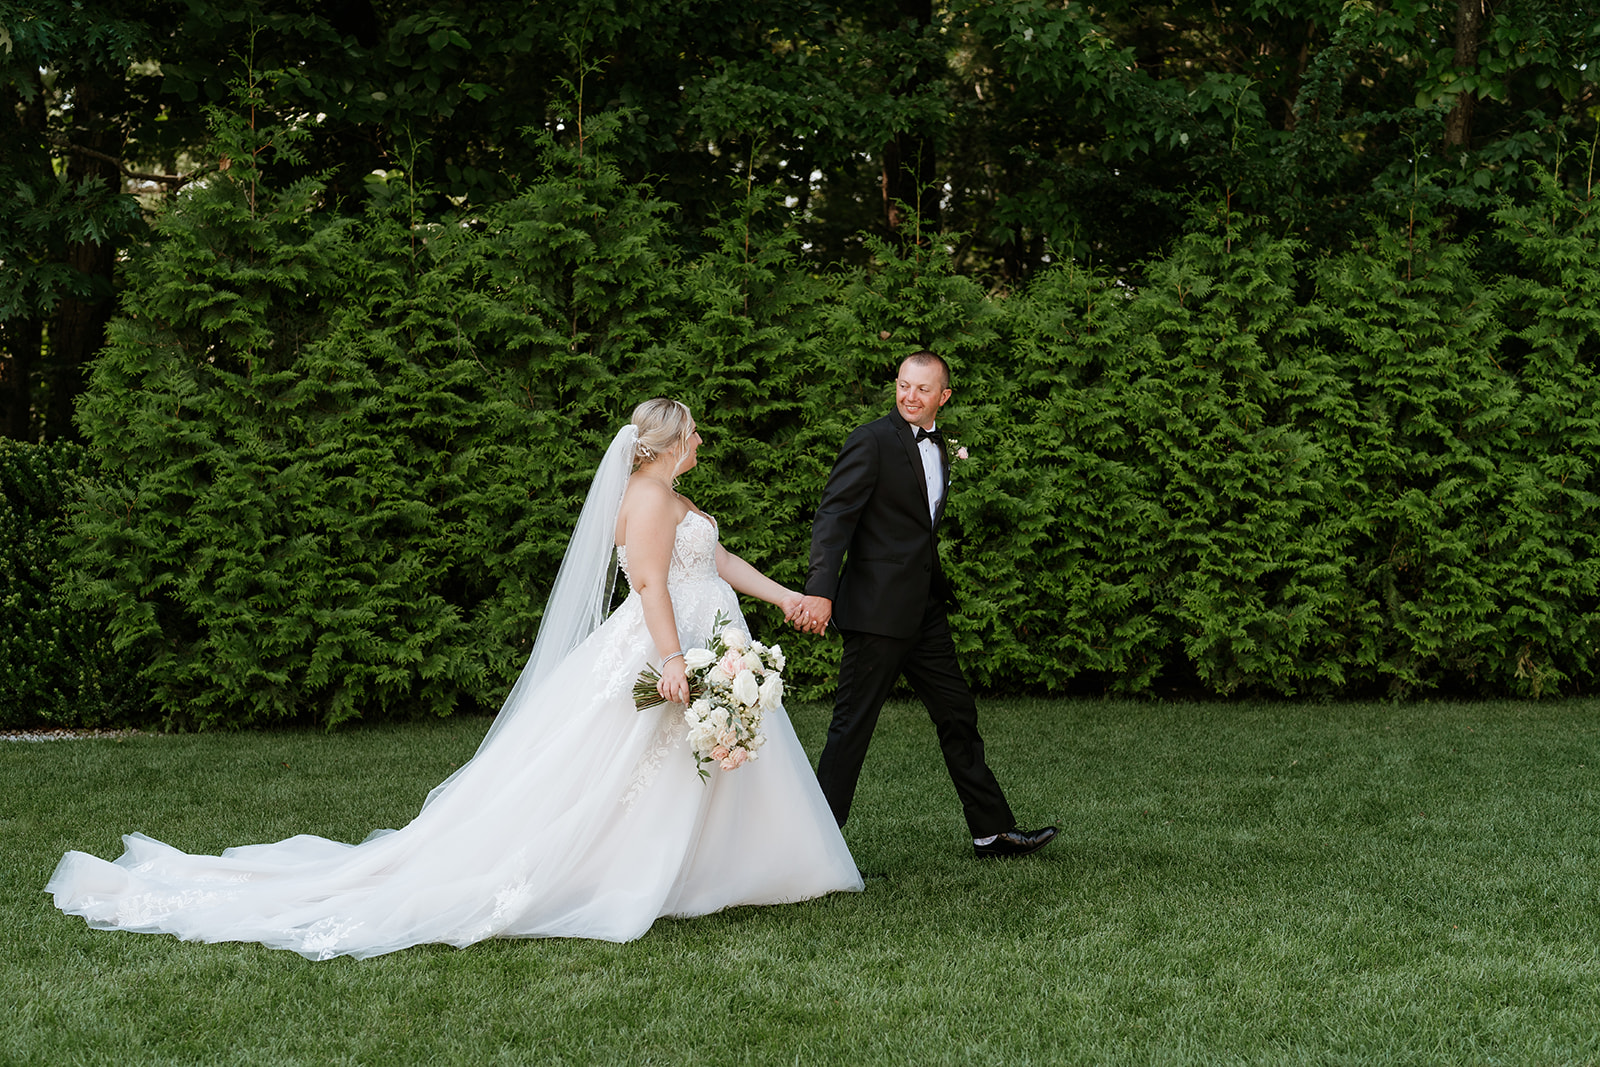 Bride and groom holding hands and walking across a lawn with a backdrop of lush greenery at Lakeview Pavilion